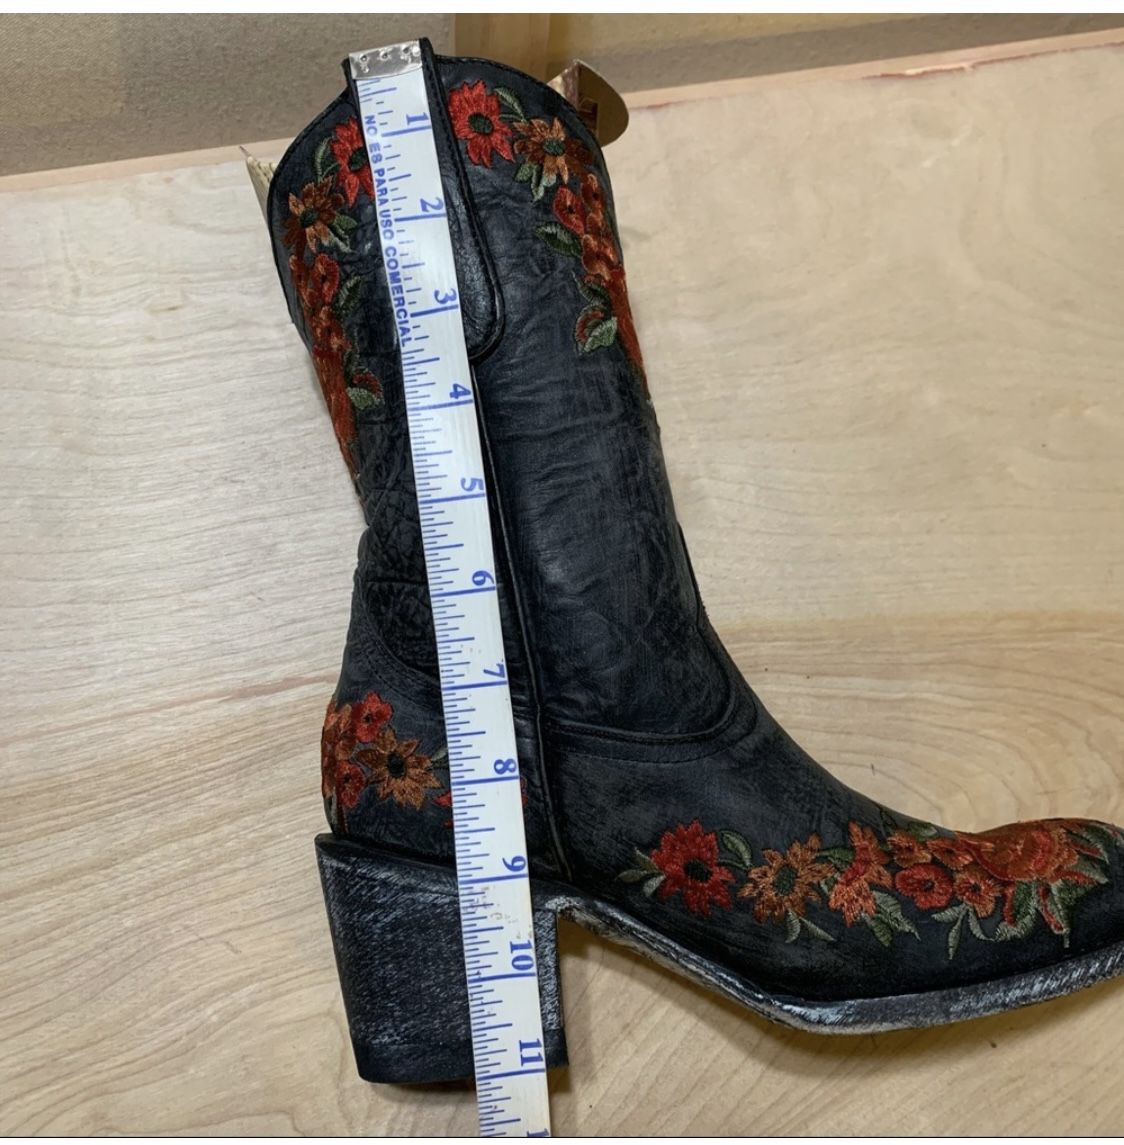 Old Gringo Yippie Kai Western Boots 